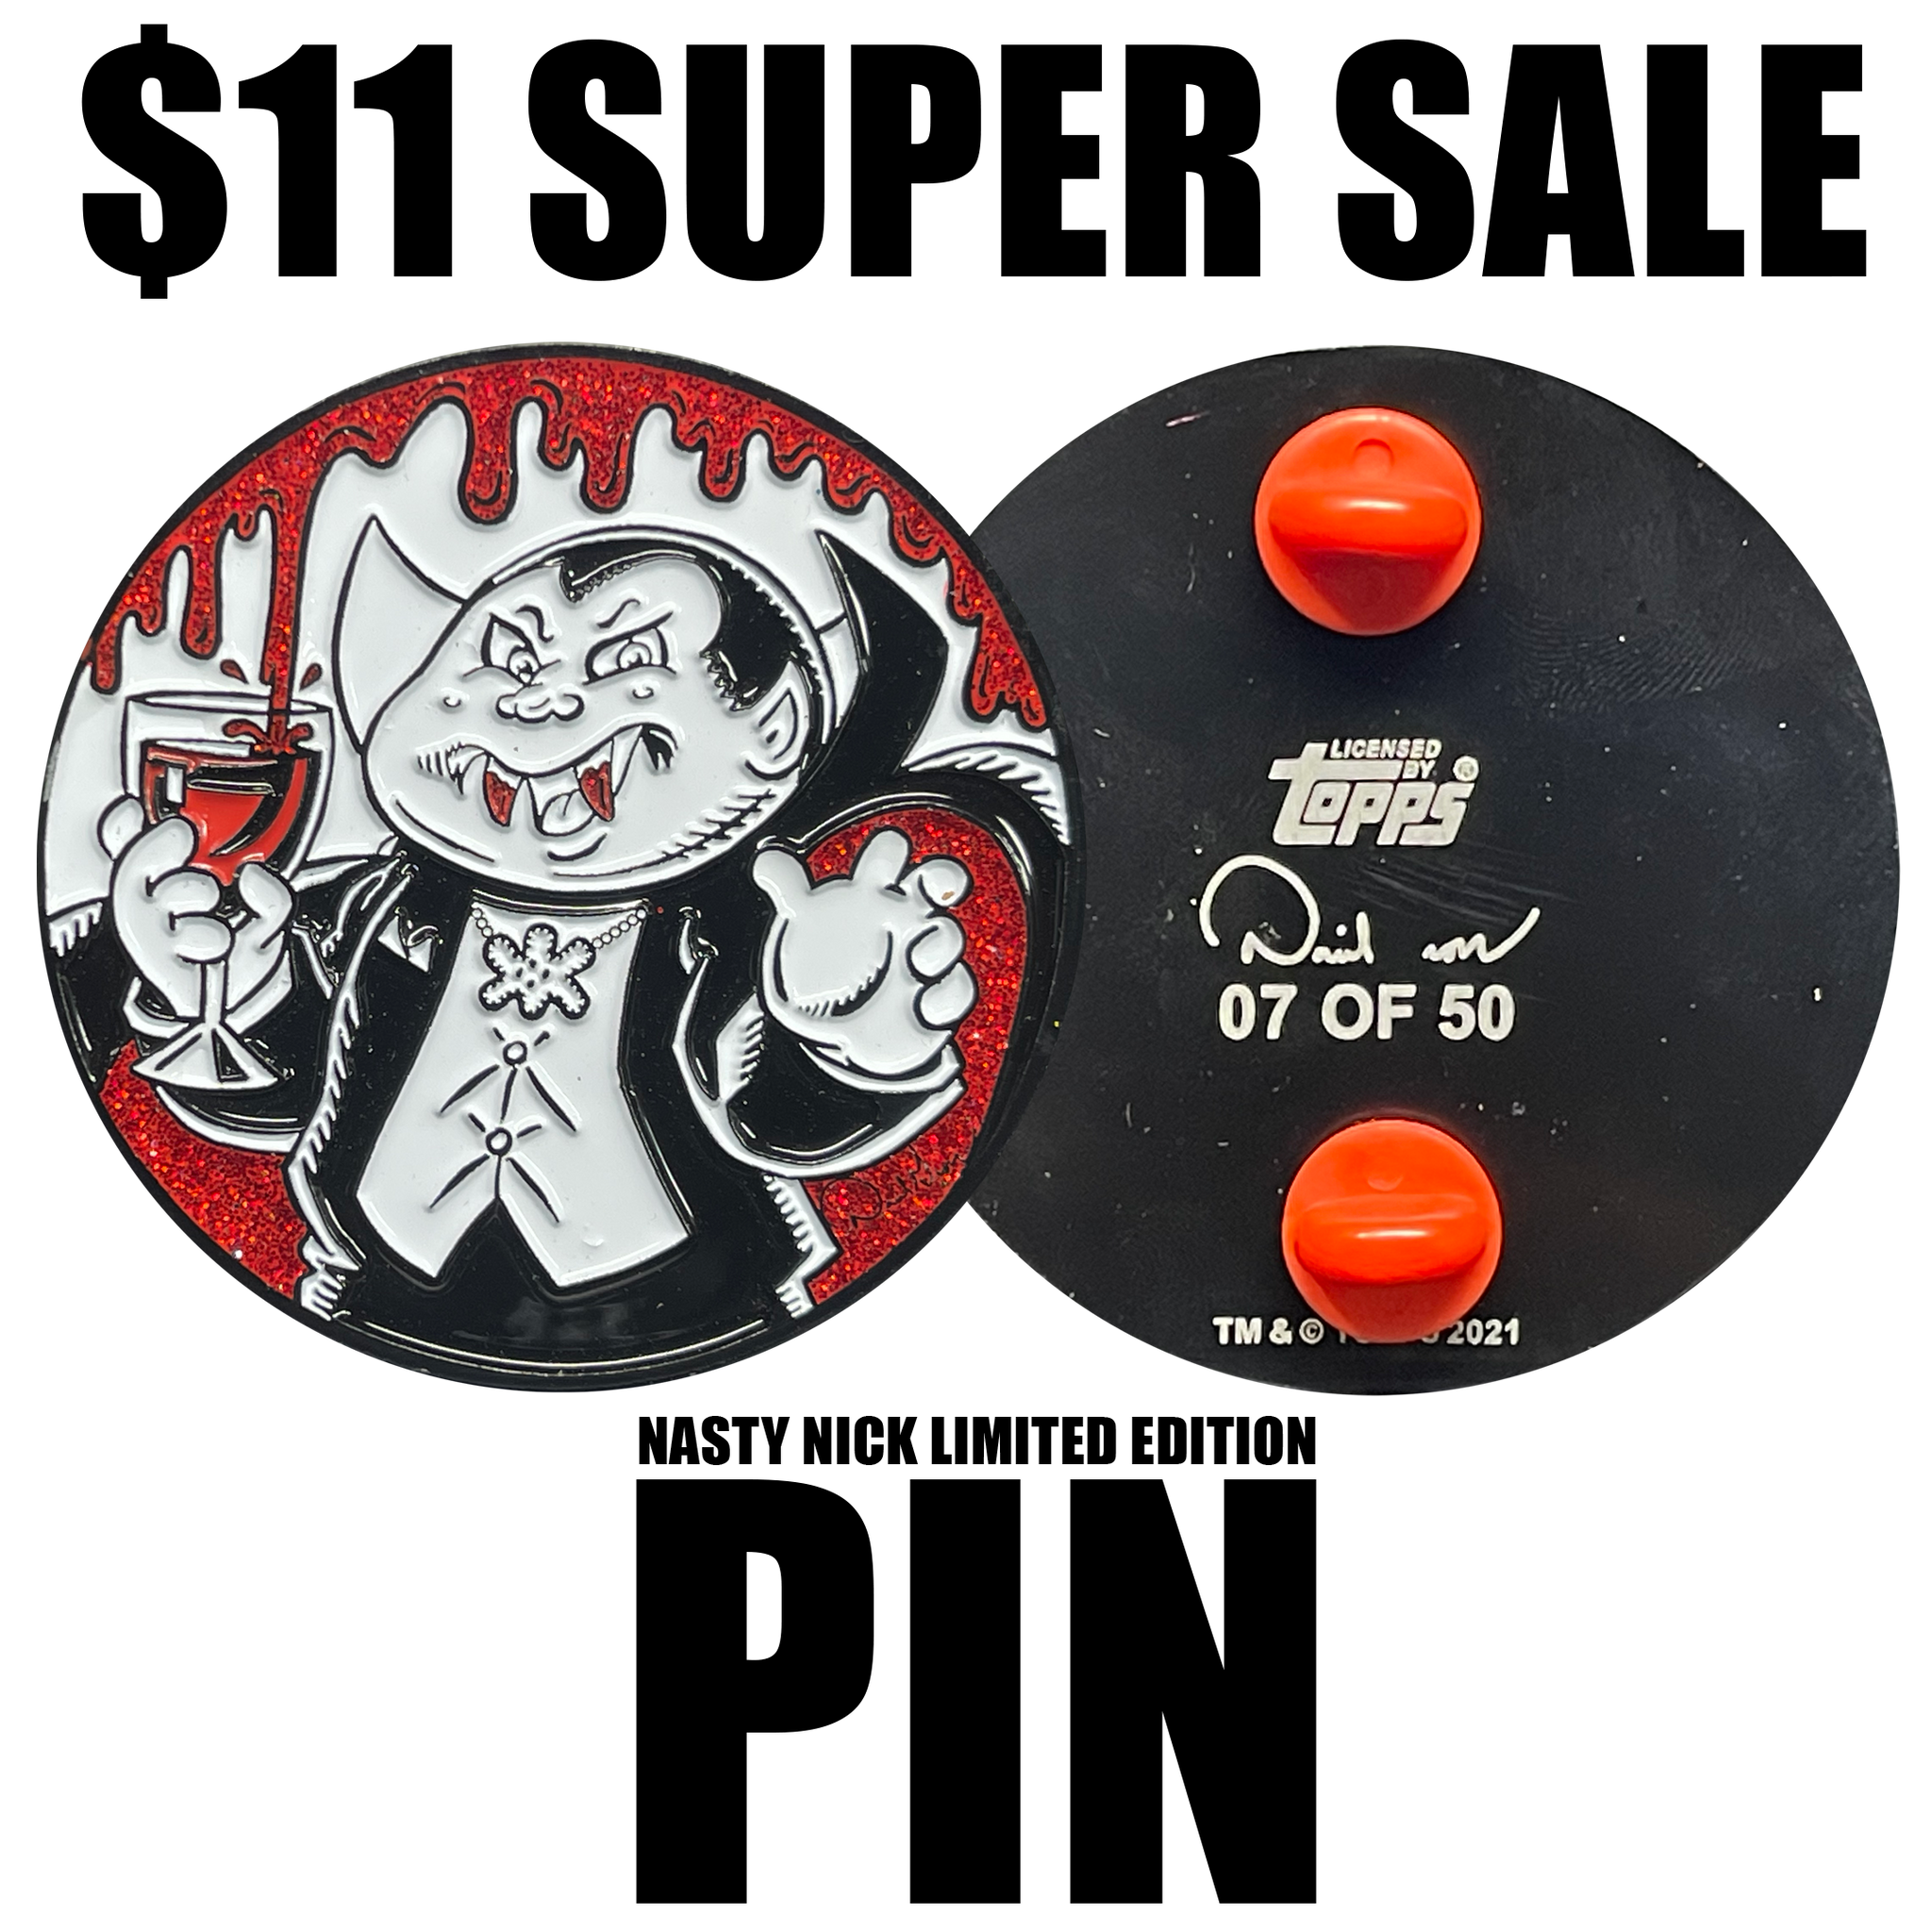 Limited Edition Pin: Nasty Nick Glittery Blood Chalice by David Gross Officially Licensed Topps Garbage Pail Kids Mini Card Embedded GPK Pin